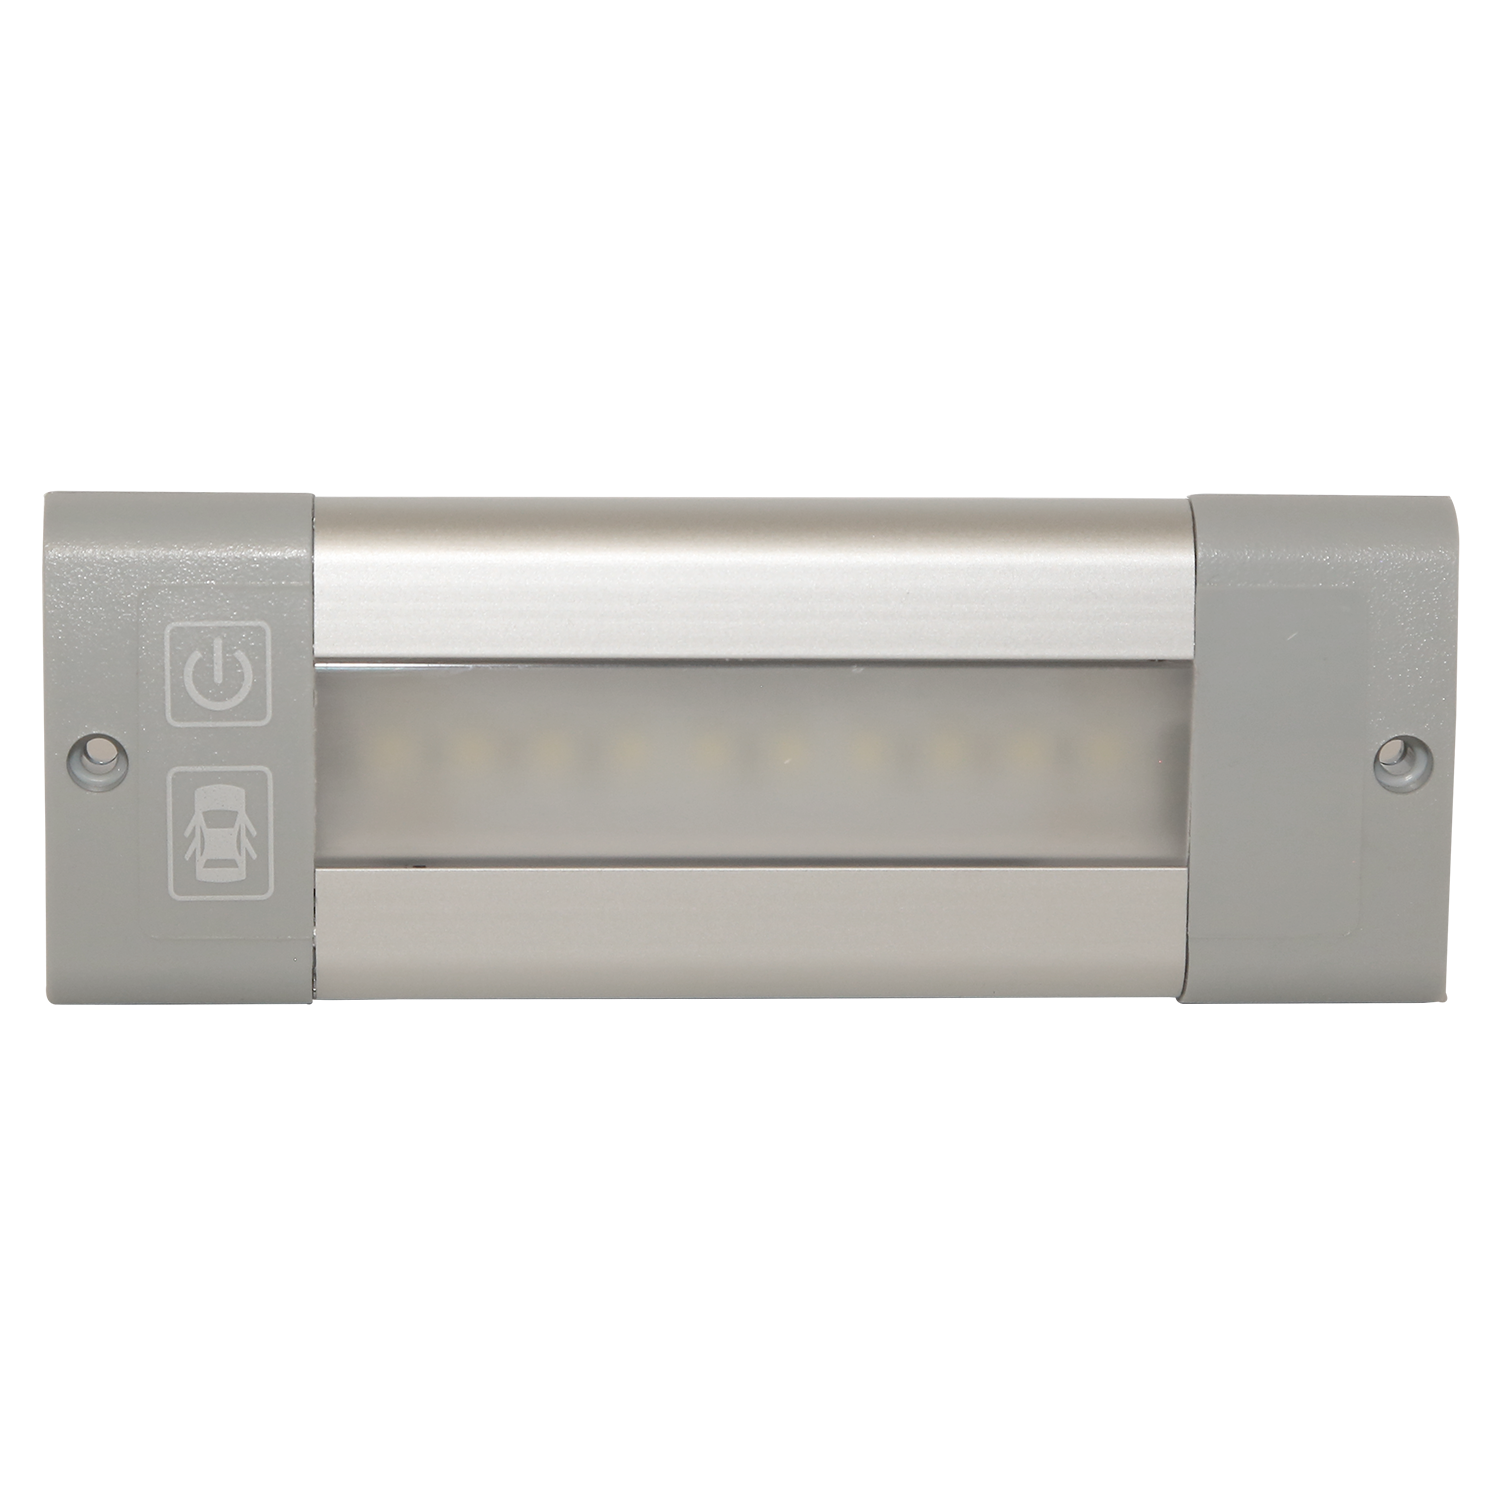 ECO EW0410 ECCO 10 LED Interior Switched Light (5.4", Rectangle, Surface)